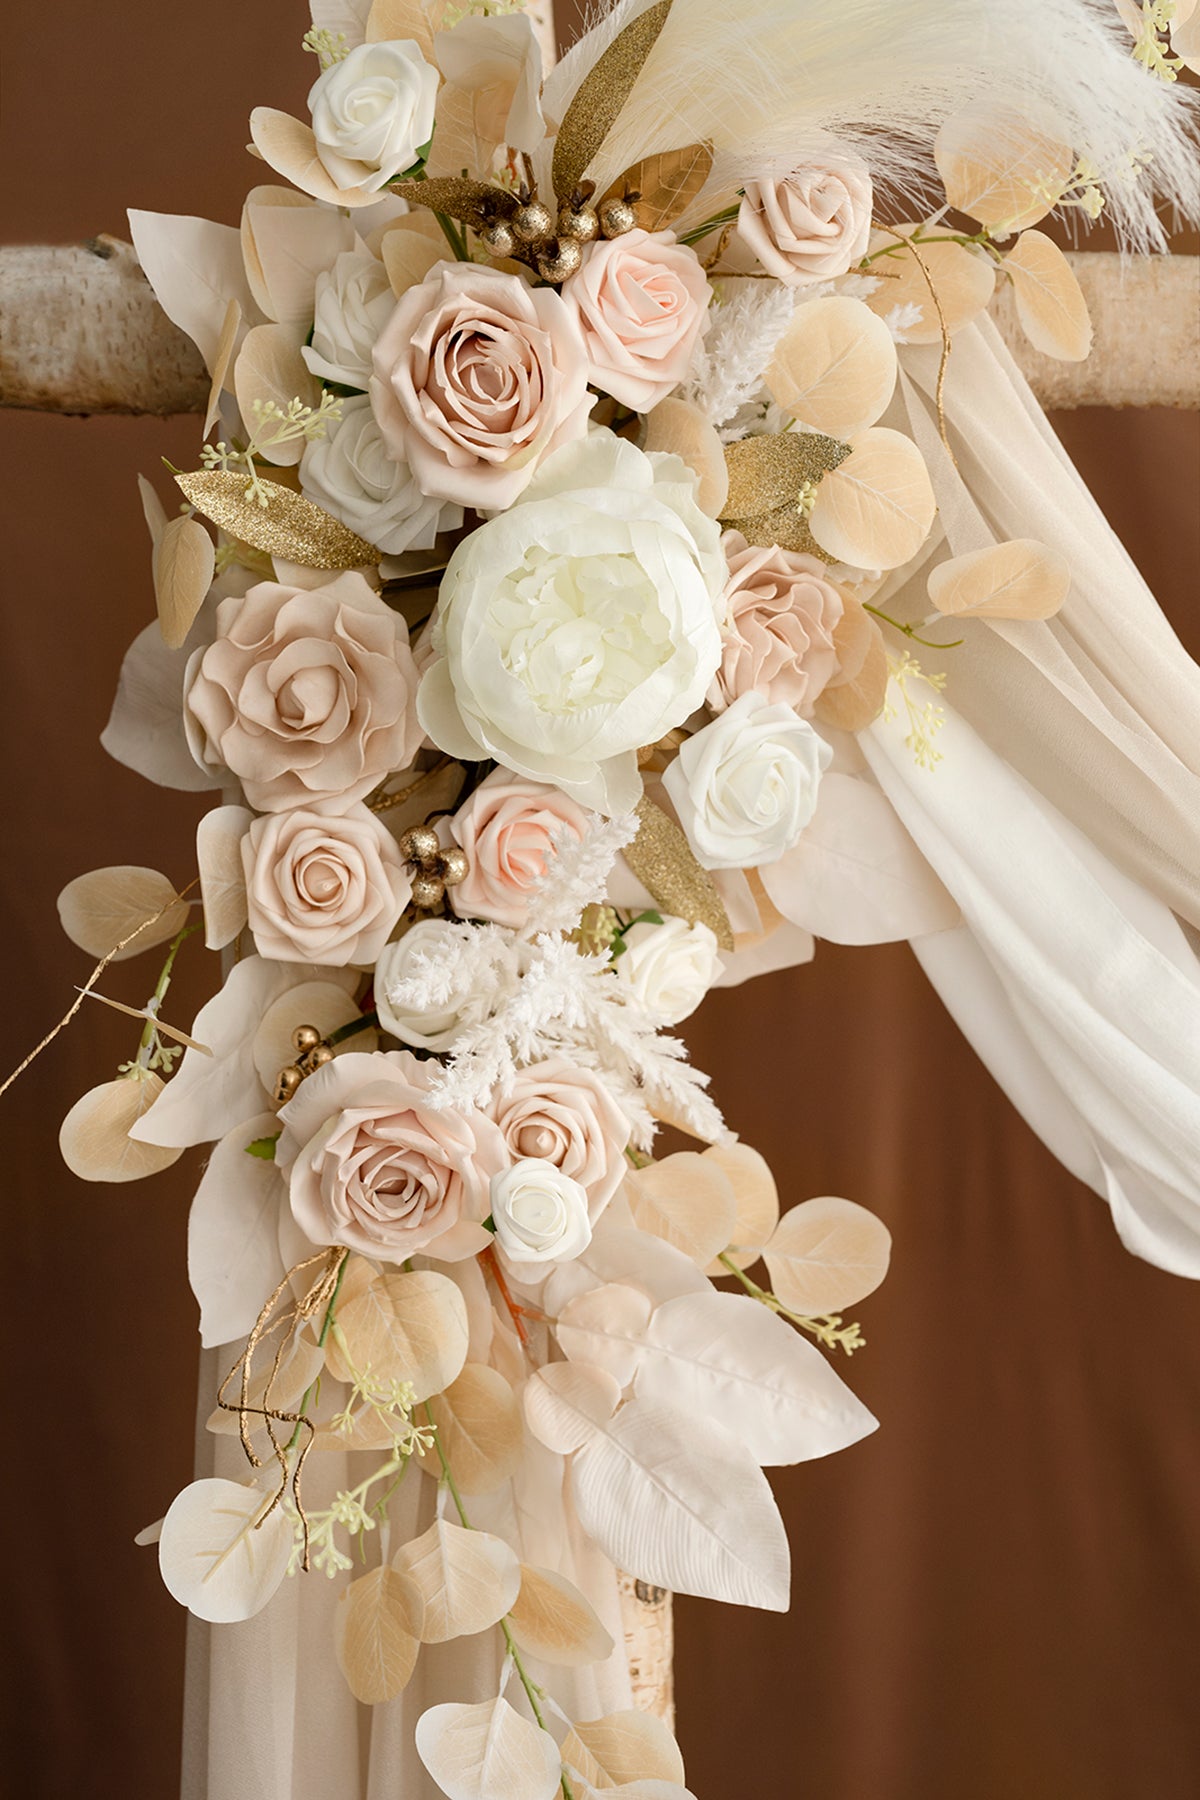 Flower Arch Decor with Drapes in White & Beige | Clearance